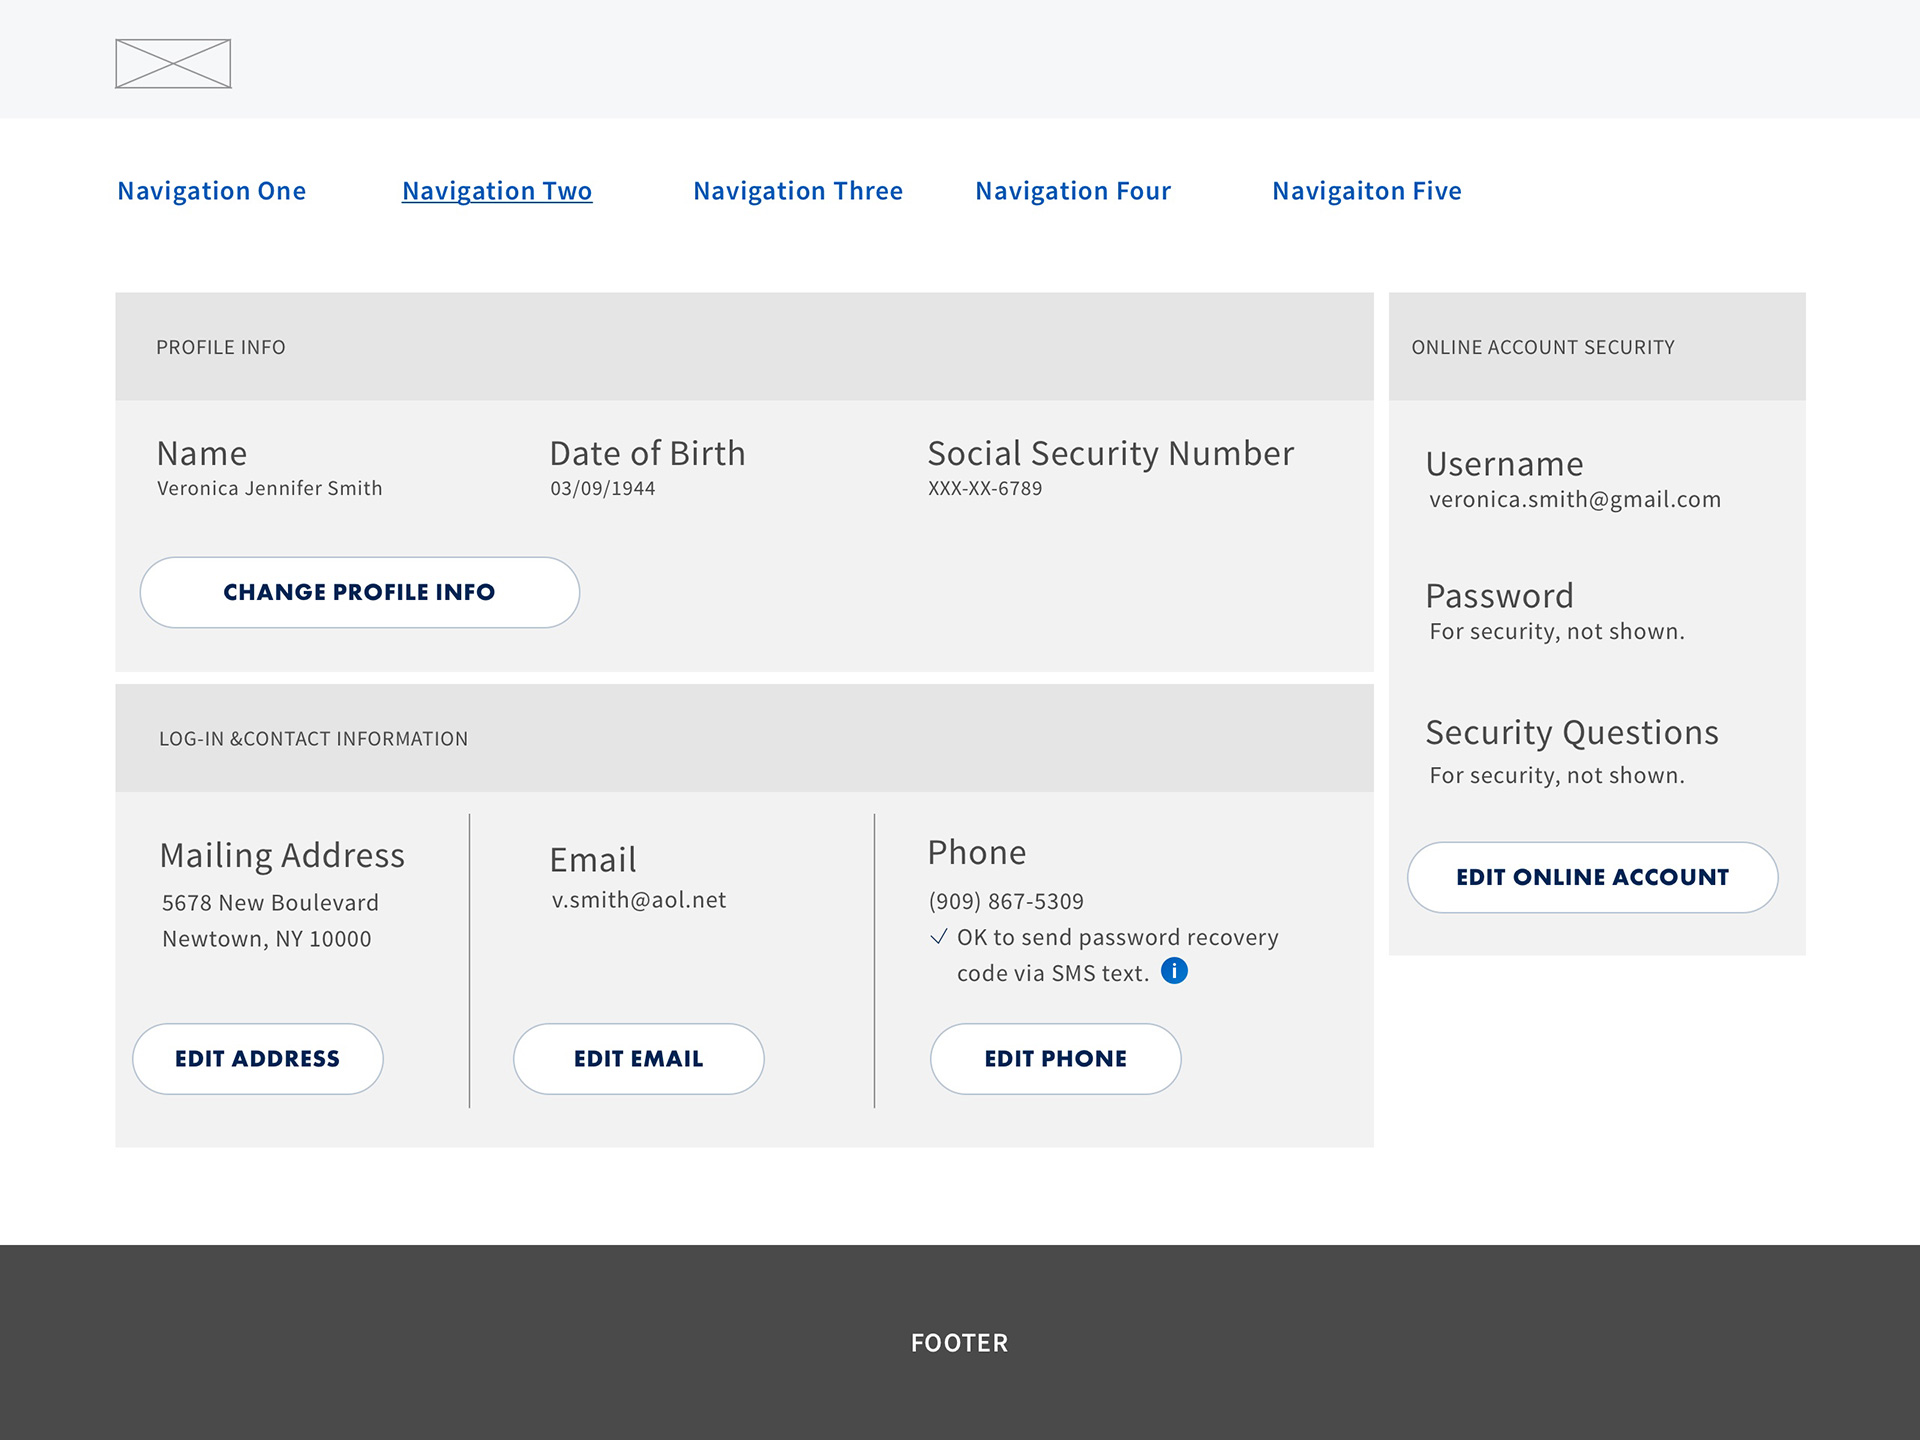 Pensions: Profile Wireframe